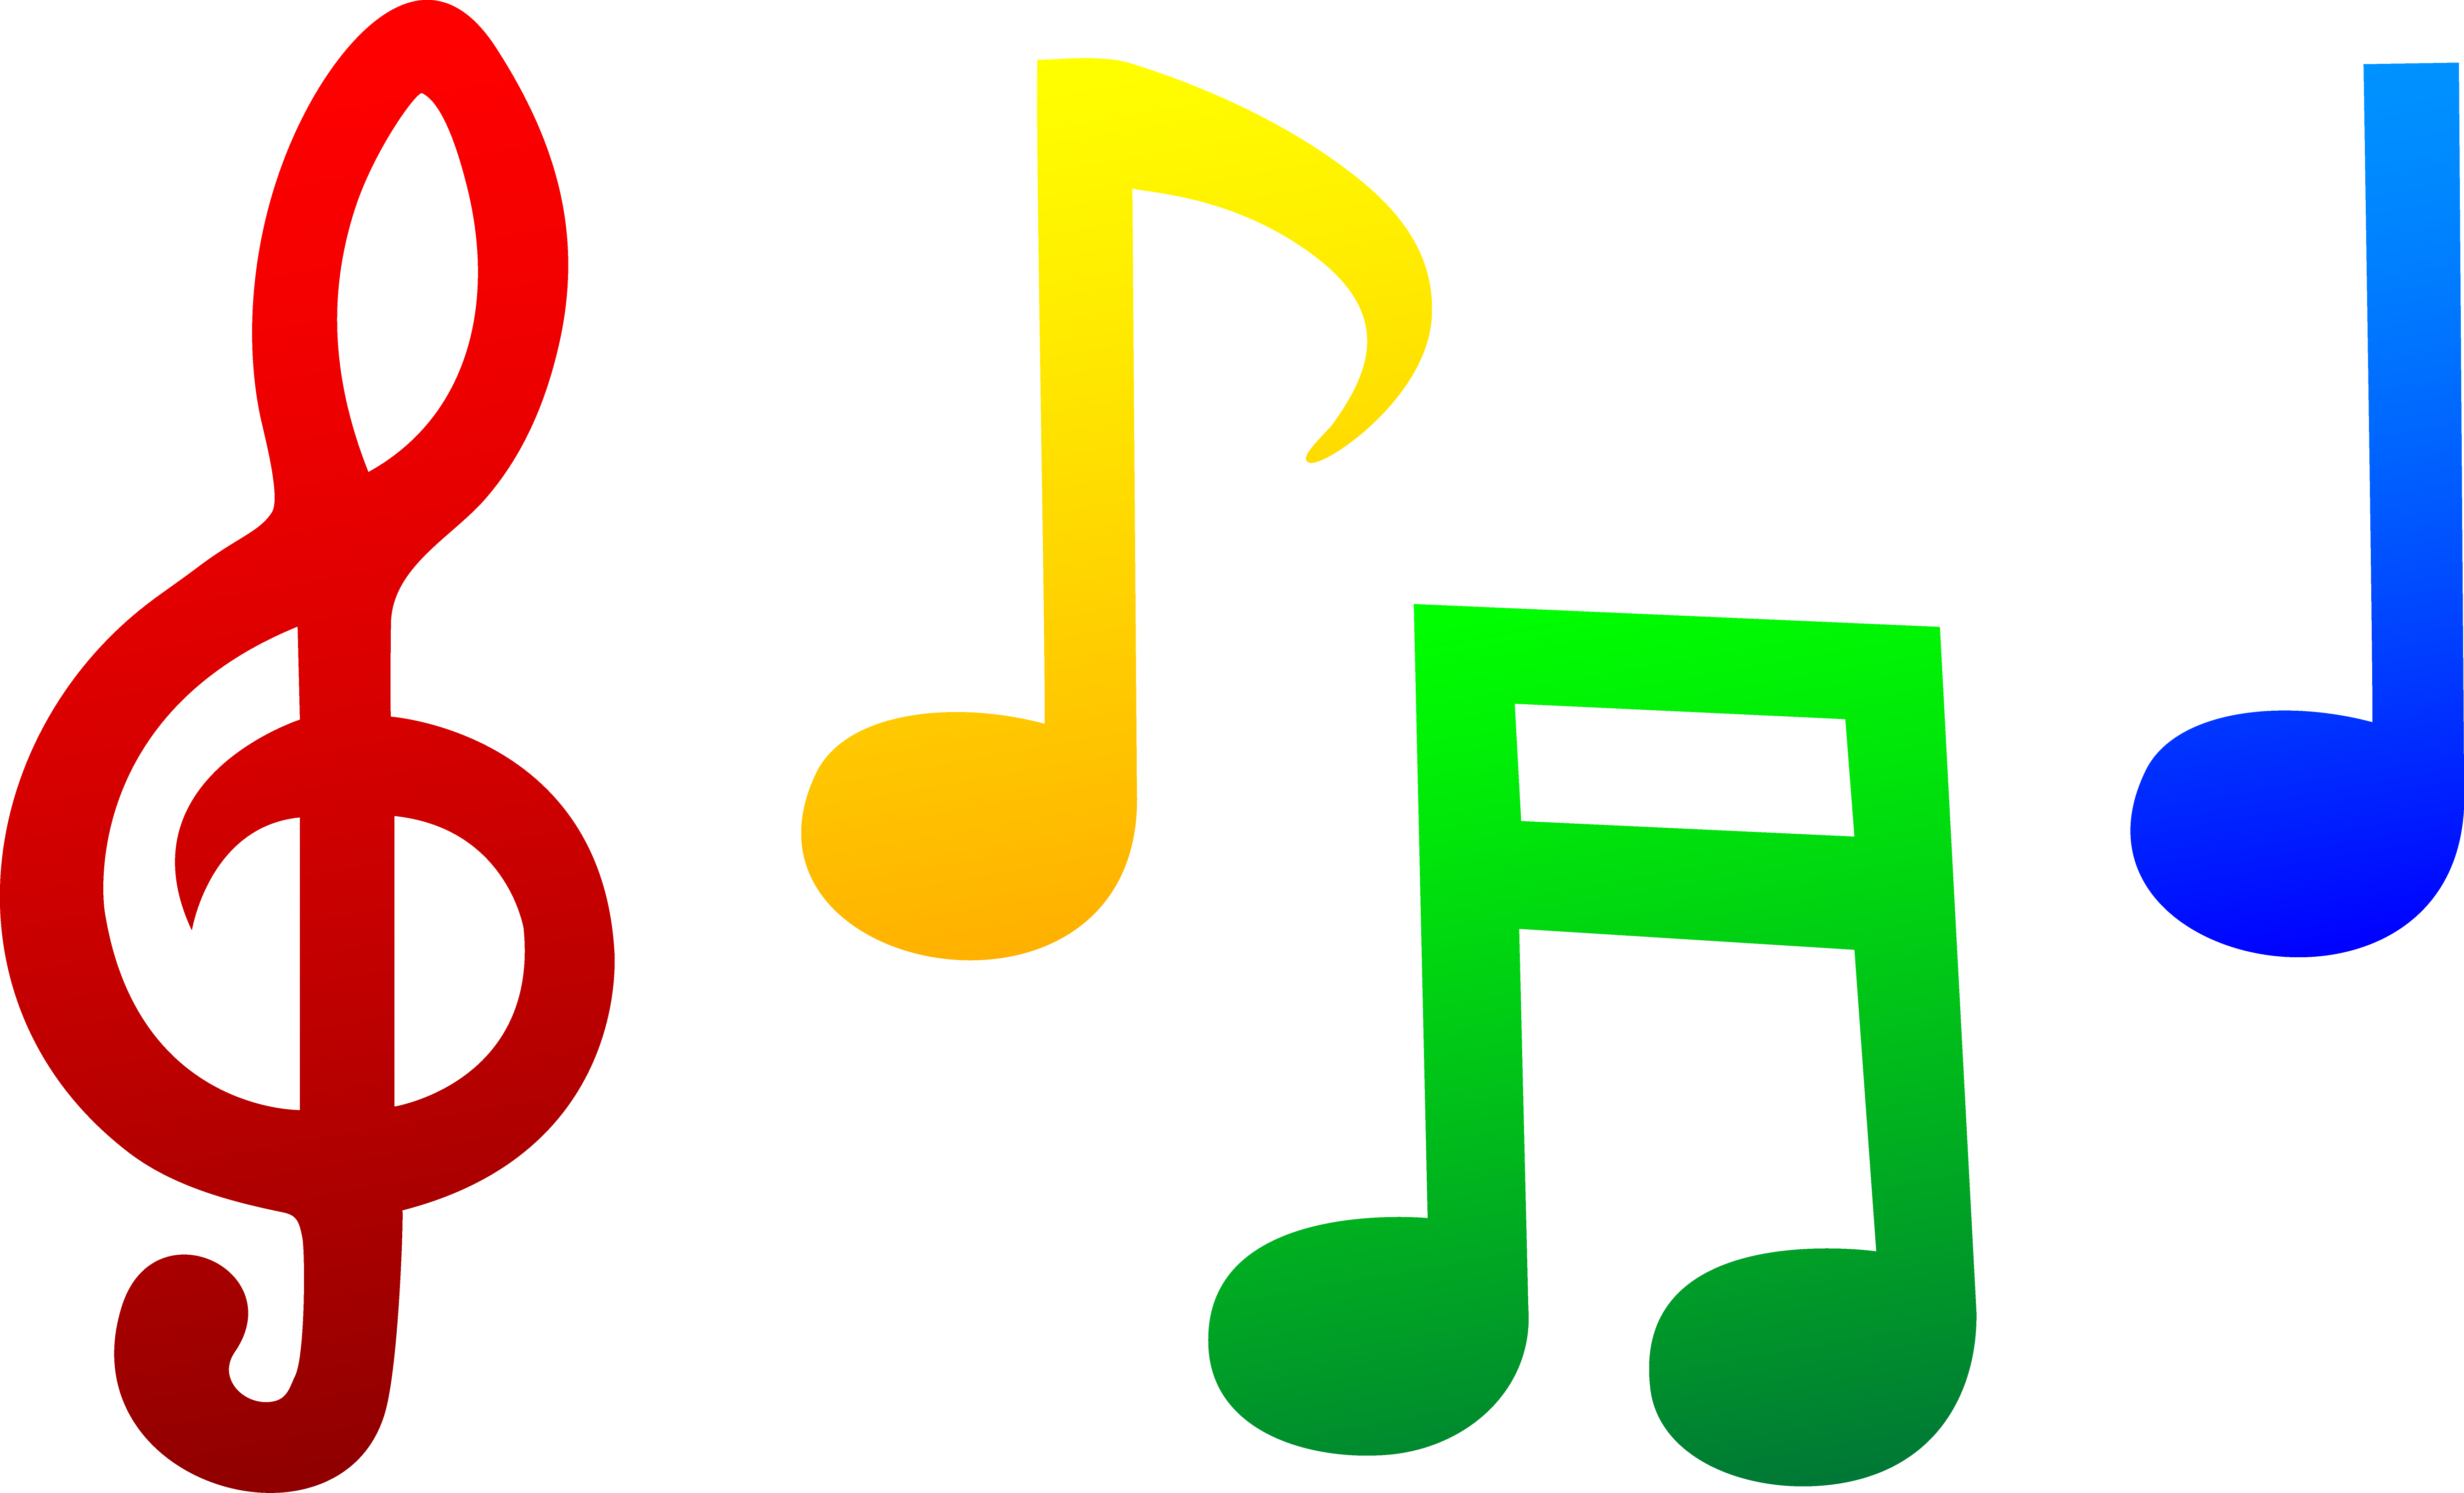 Musical Notes Clip Art | Clipart Panda - Free Clipart Images